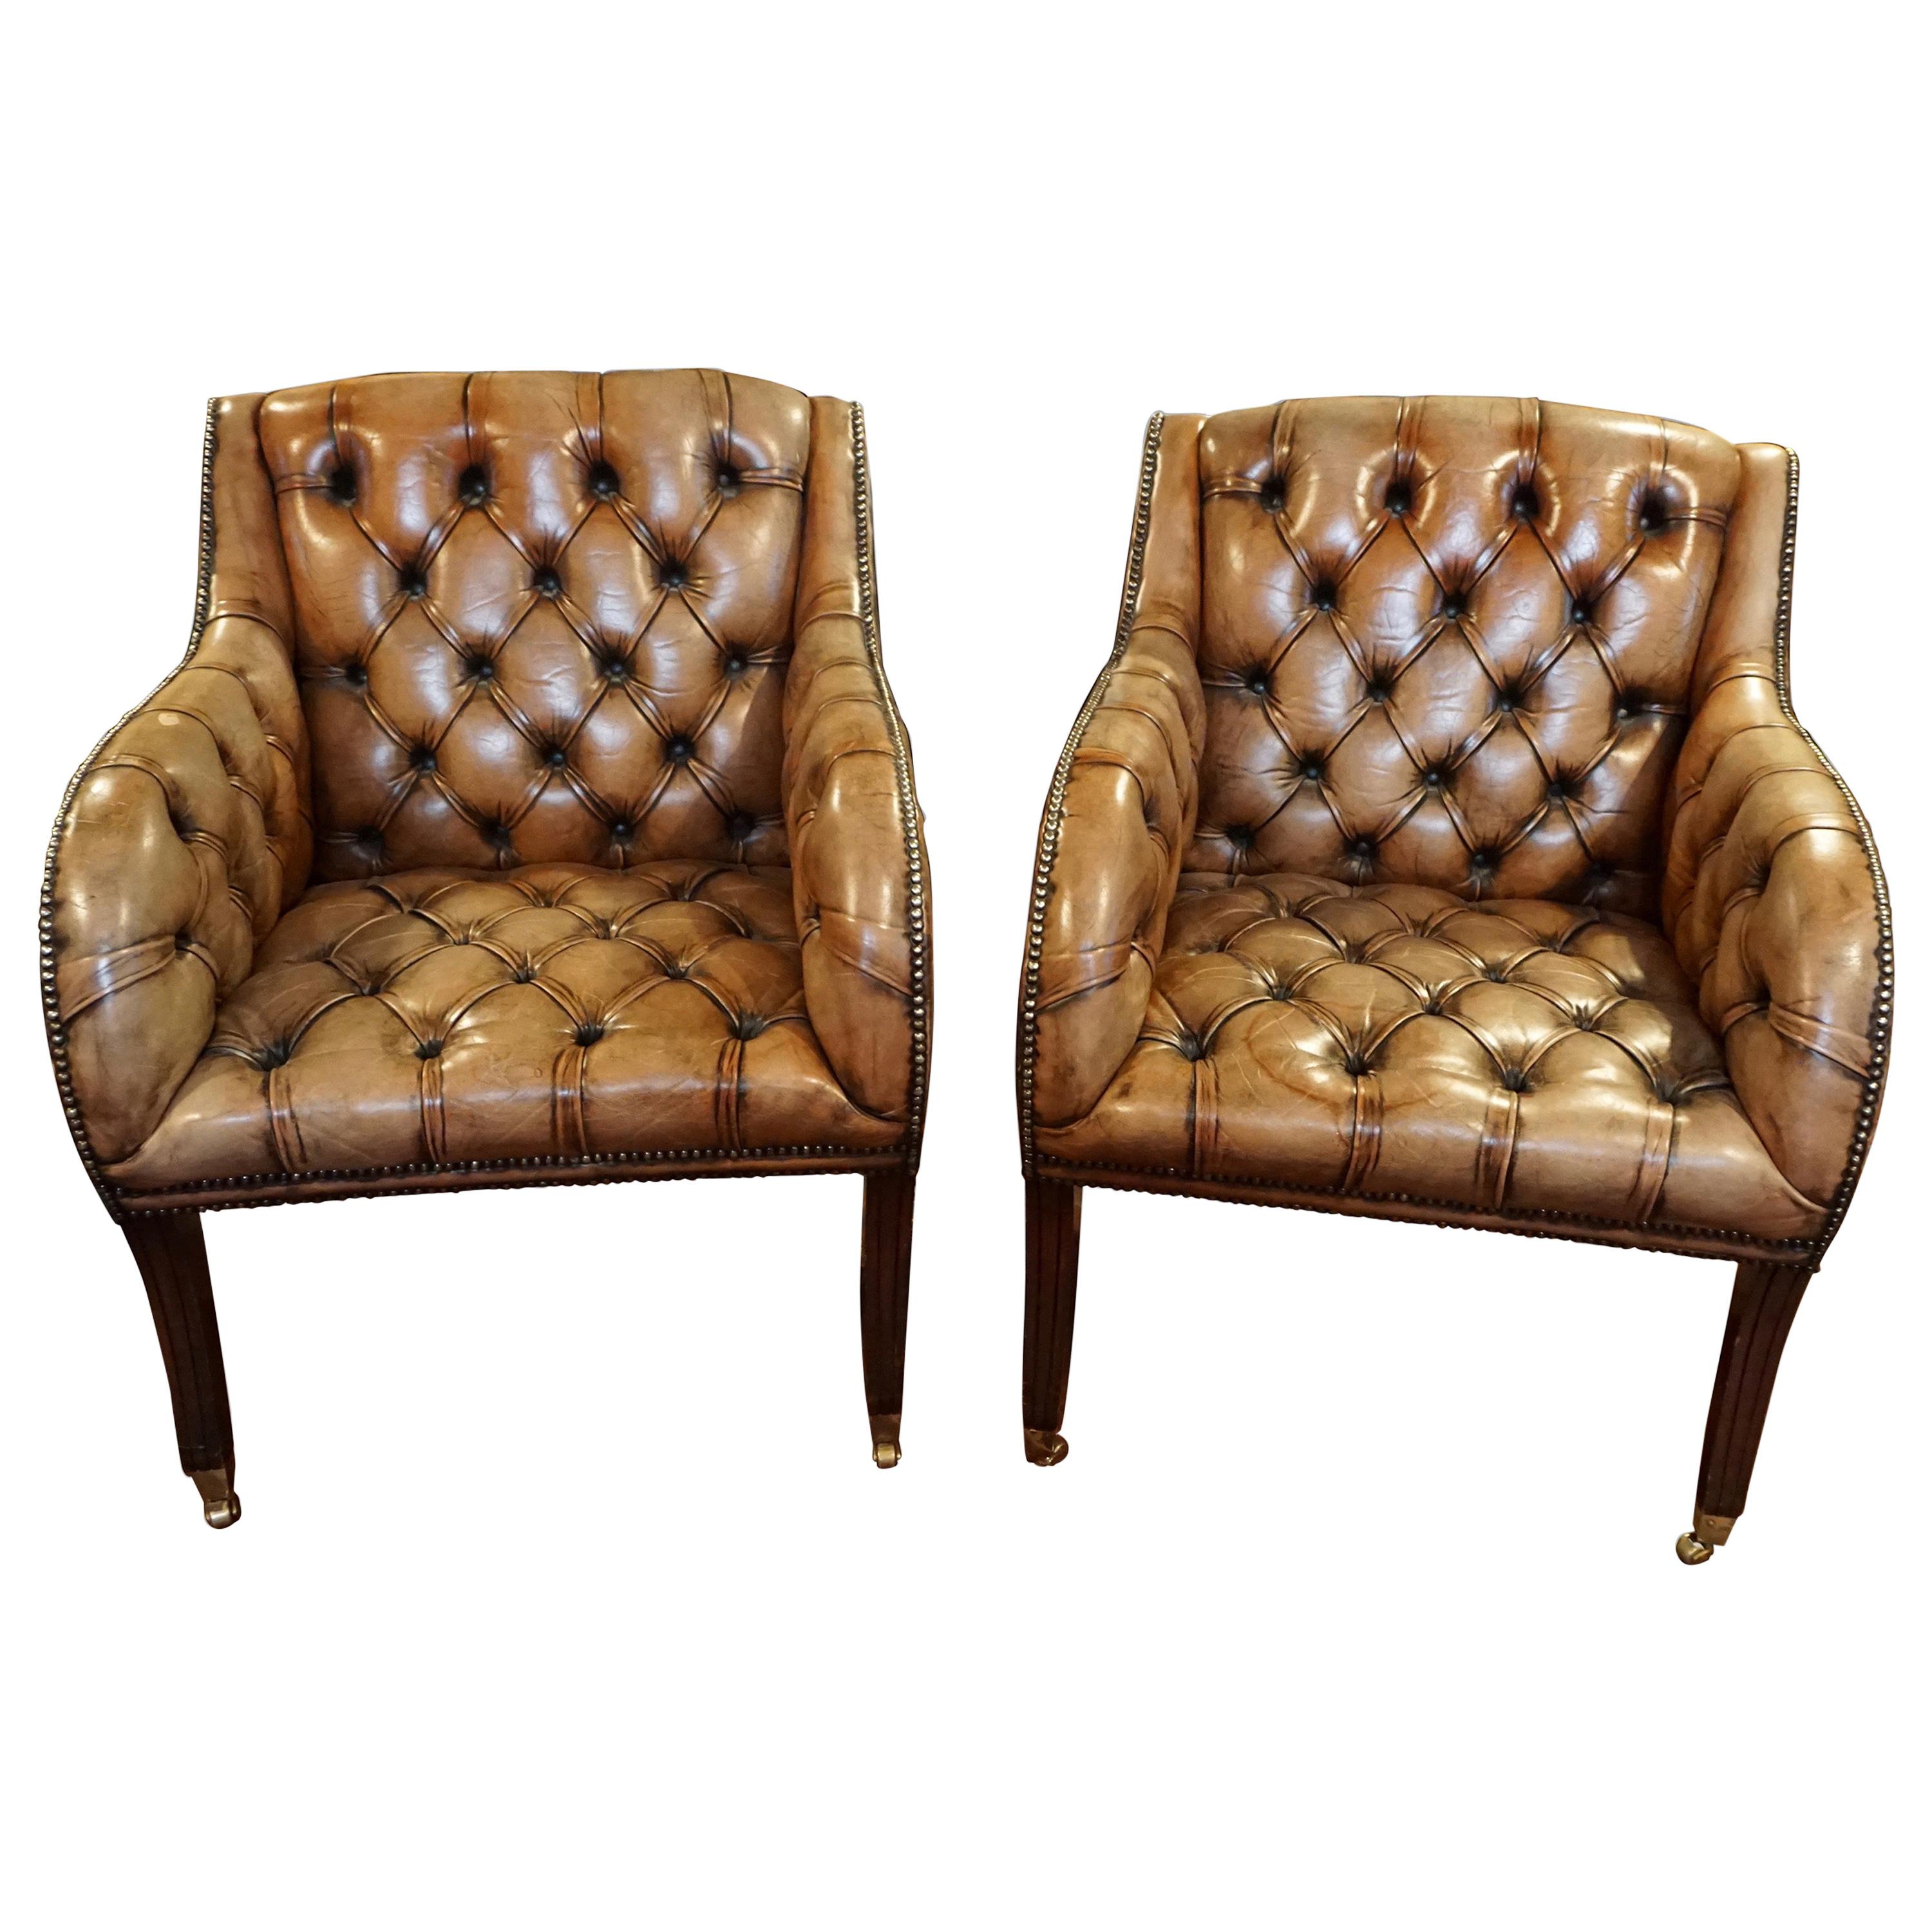 Pair of Regency Style Tufted Leather Club Chairs with Mahogany Legs